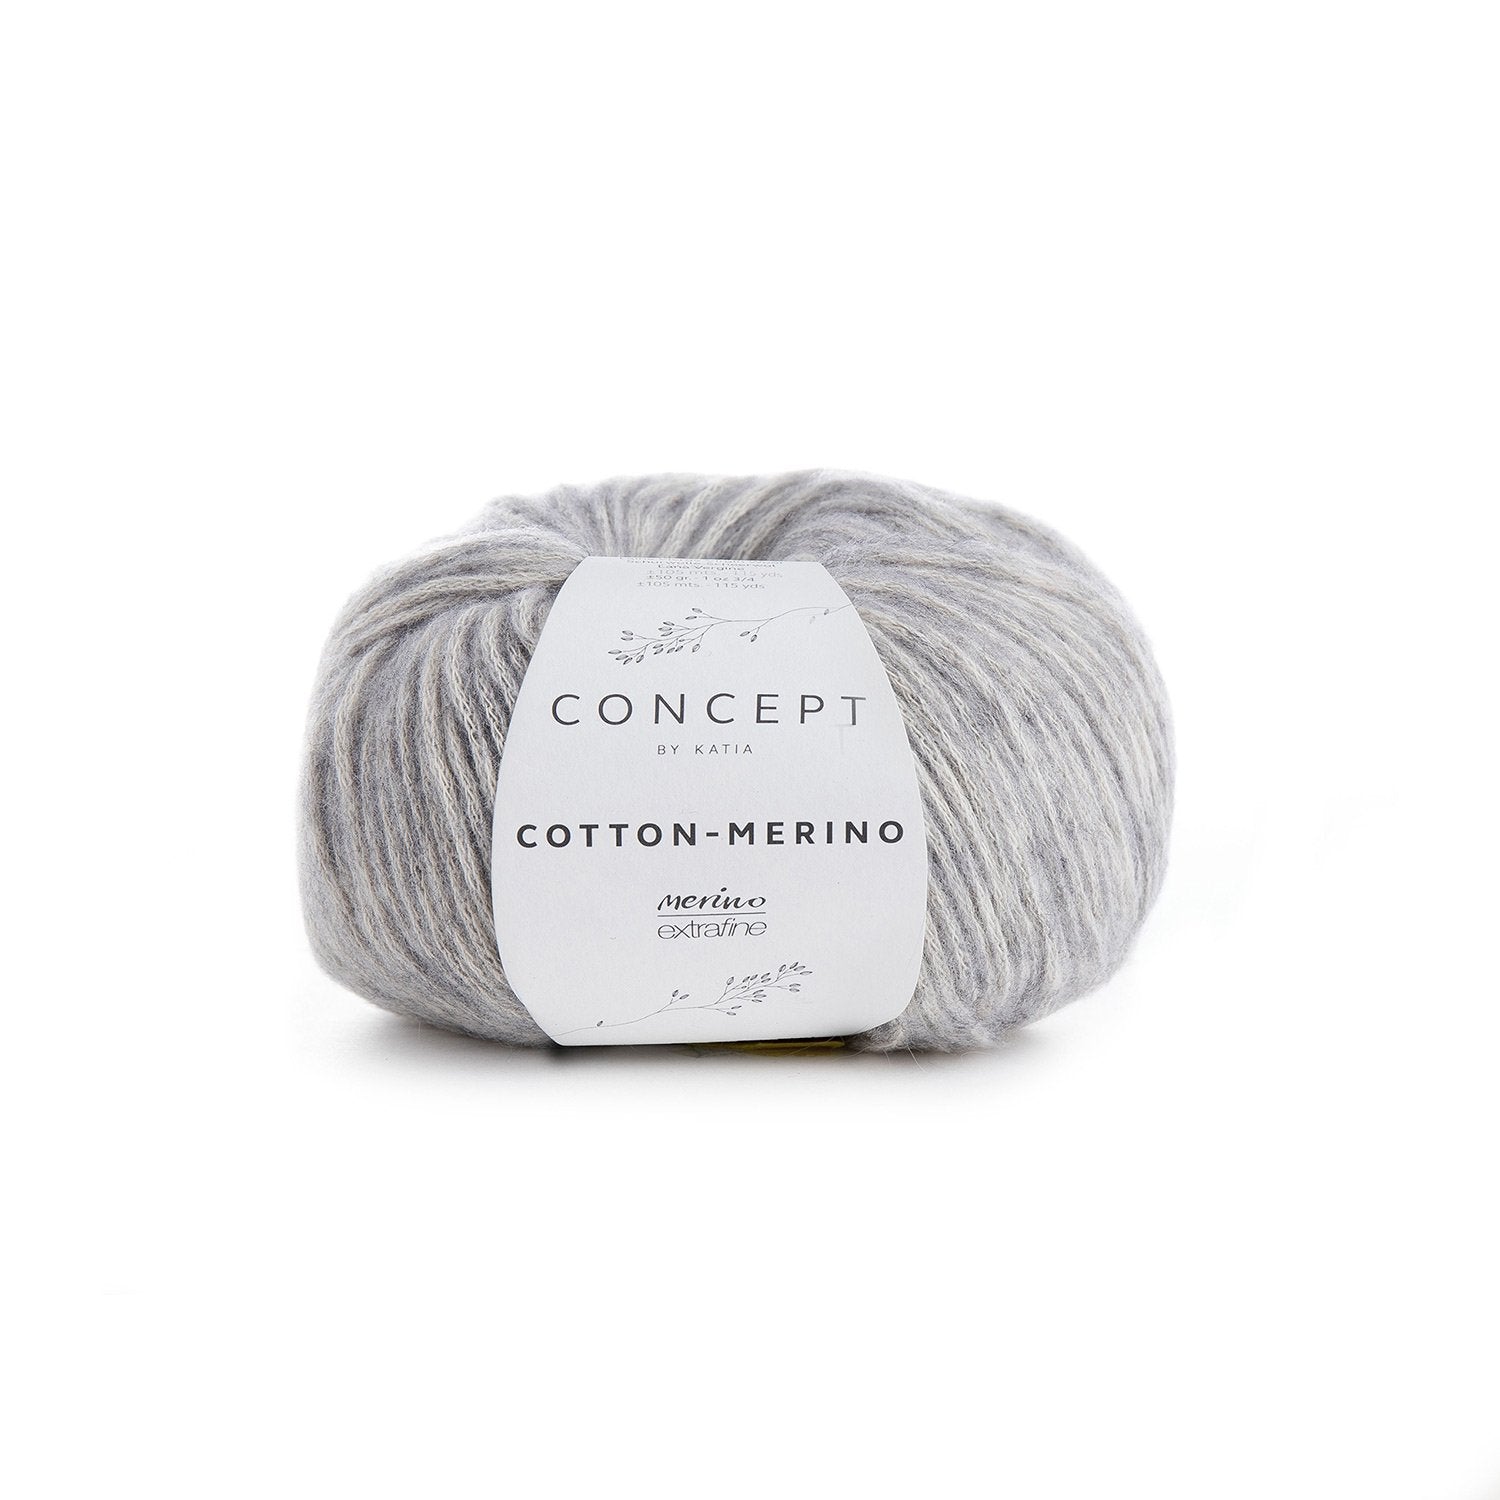 Concept by Katia Cotton-Merino - 106 Light Grey - 10 Ply - Concept by Katia - The Little Yarn Store